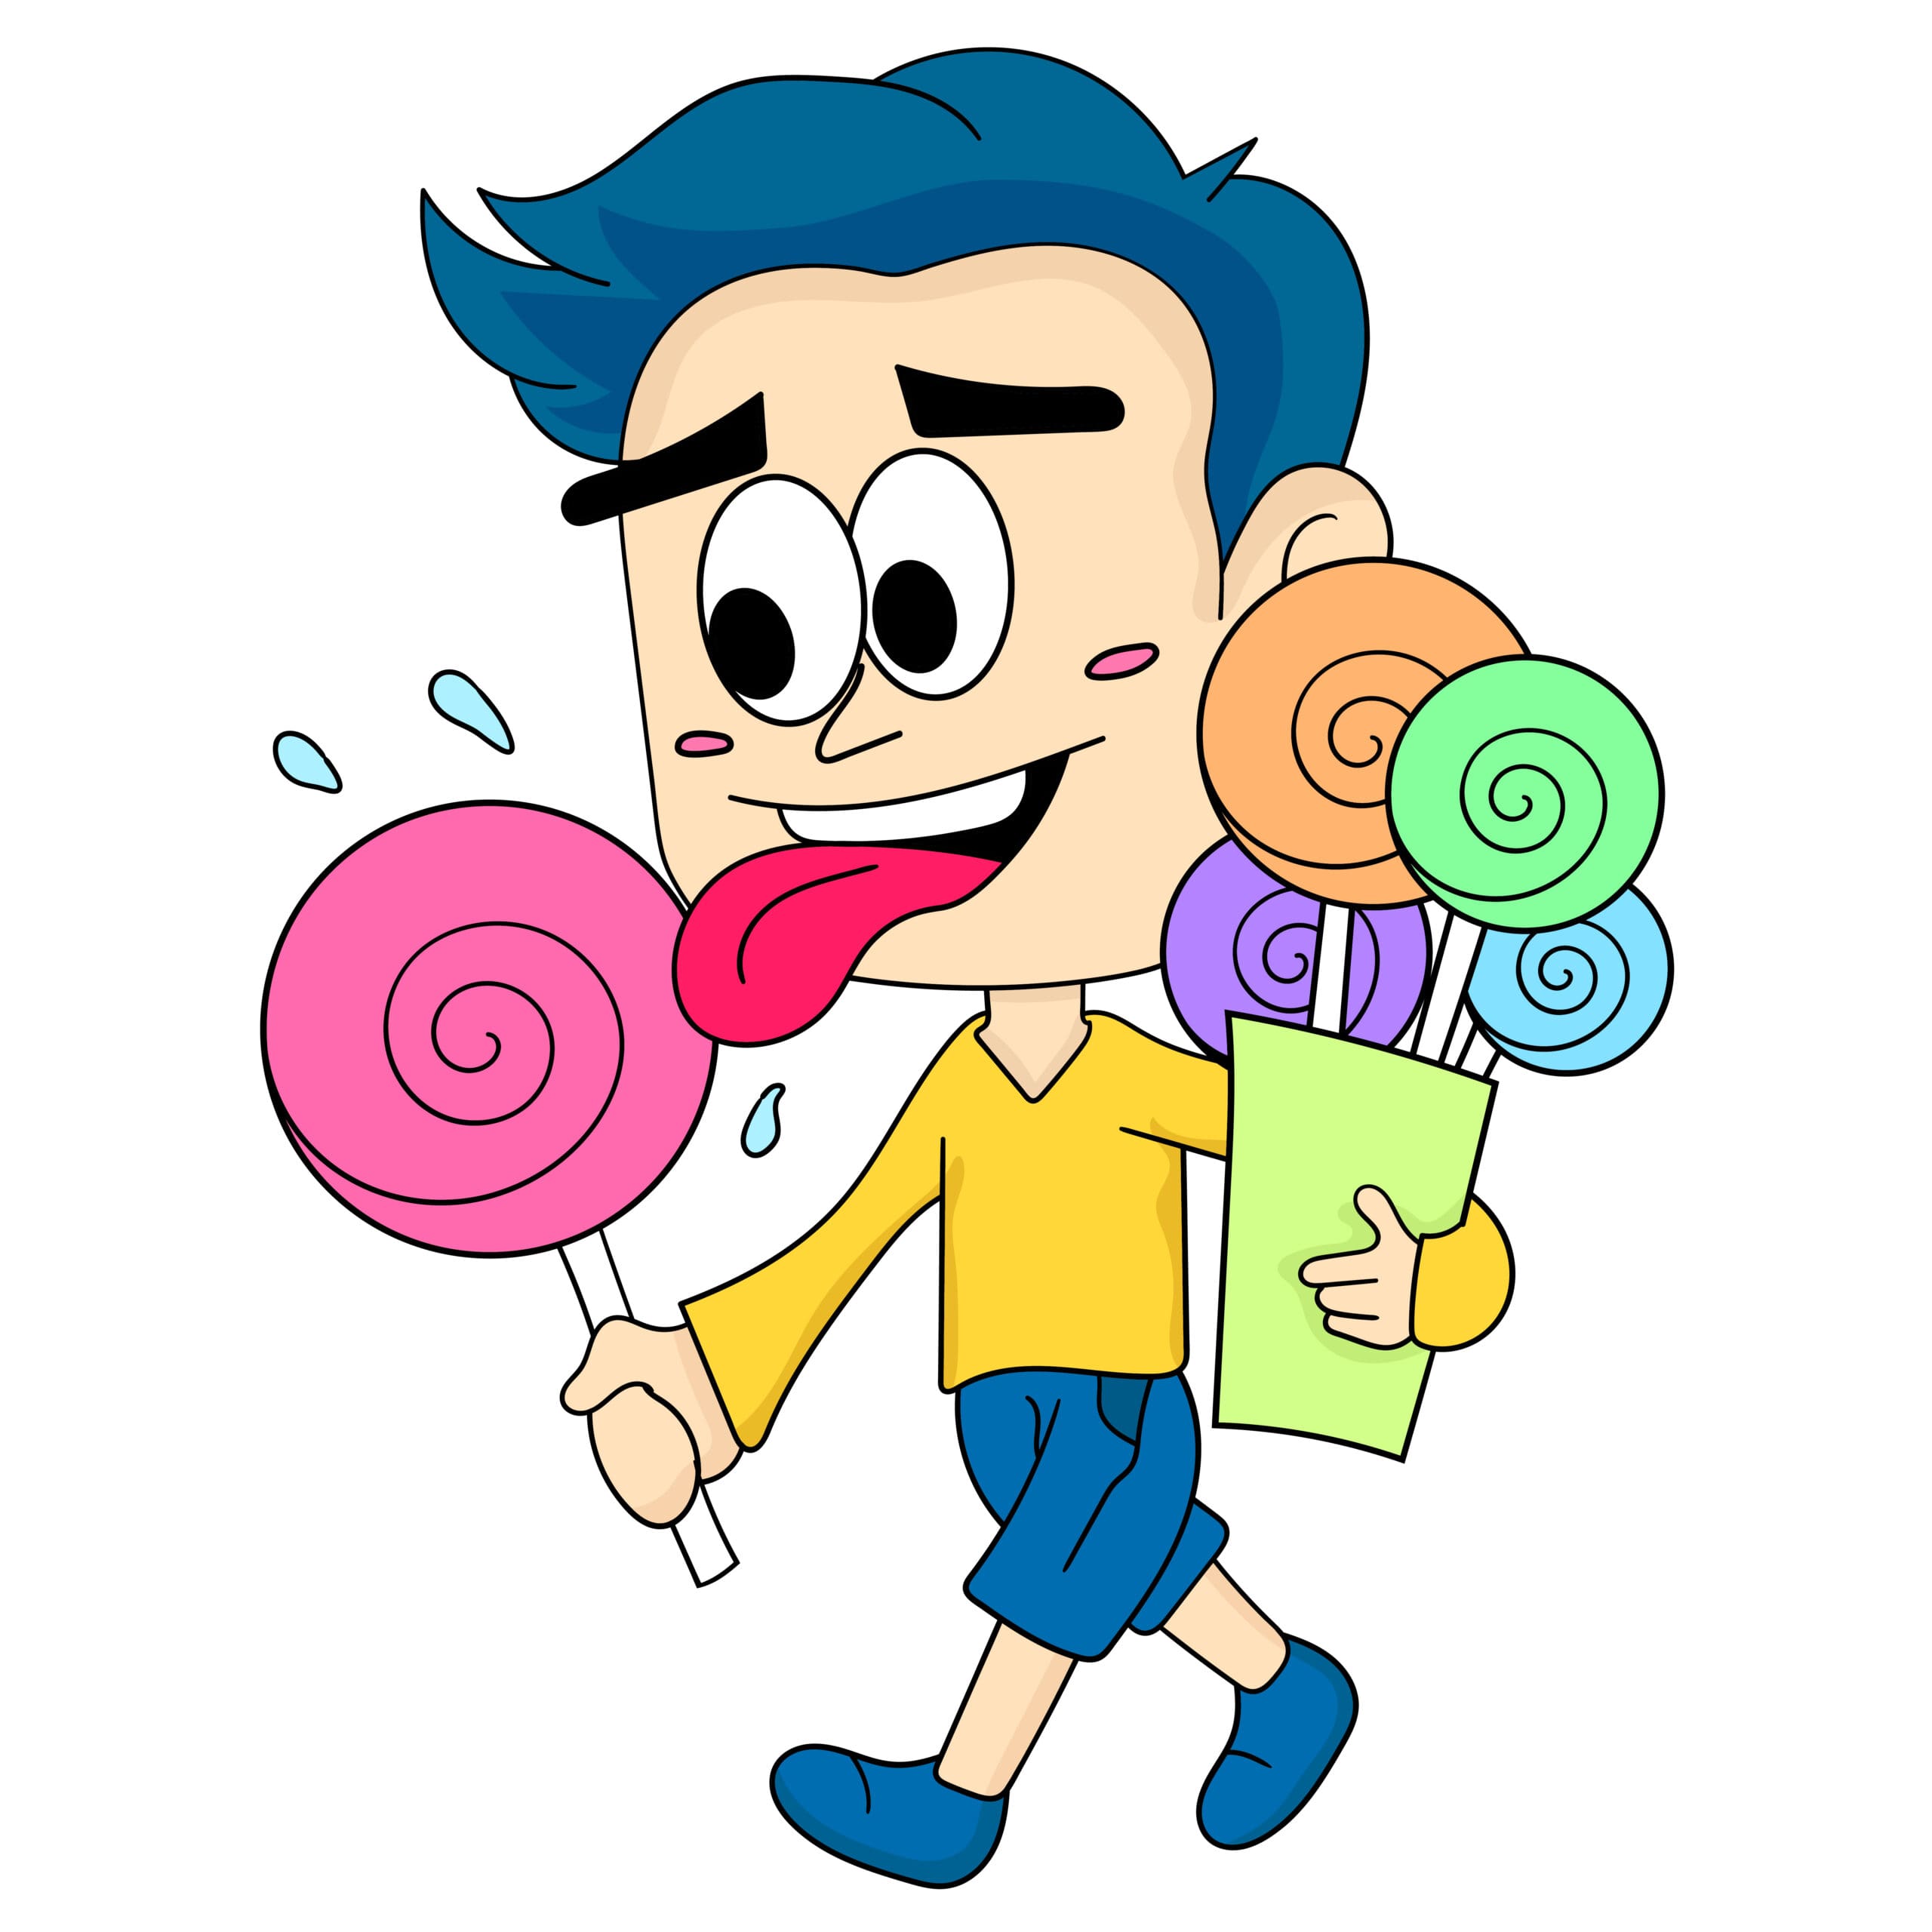 Cartoon graphic of a satisfied lollipop with a big smile and sunglasses waving goodbye on a candy-themed background.